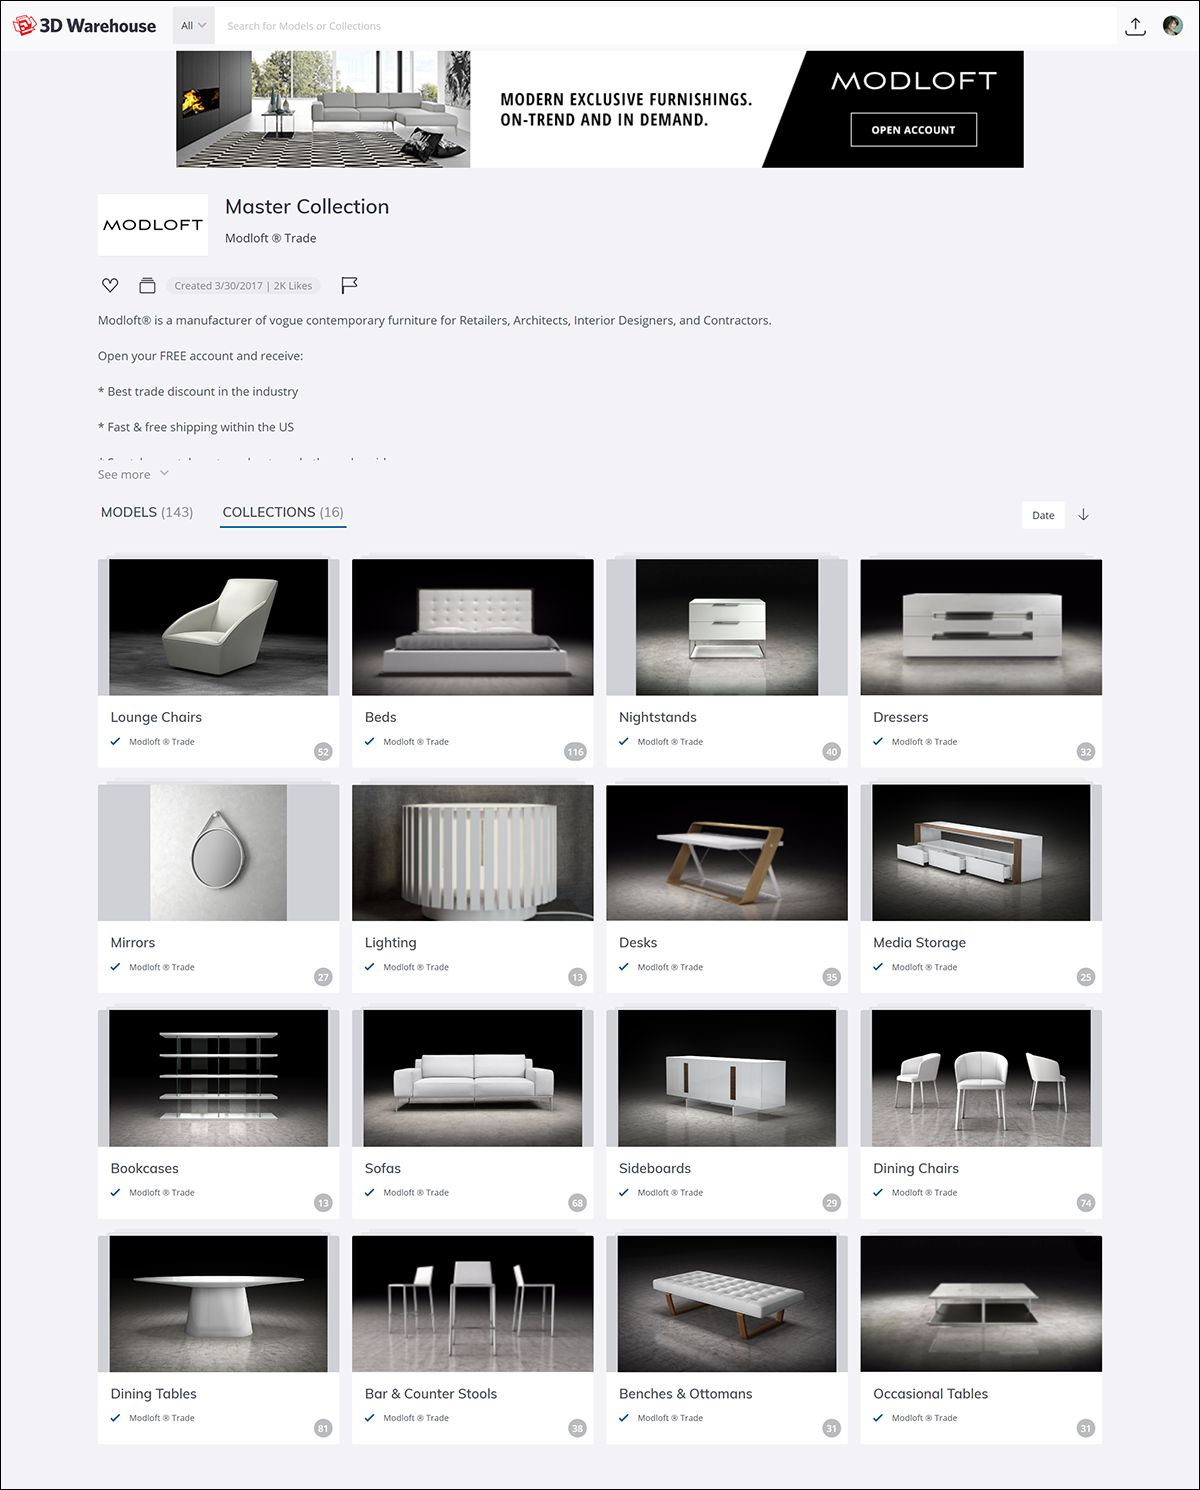 The 3D Warehouse catalog features showcase your company products